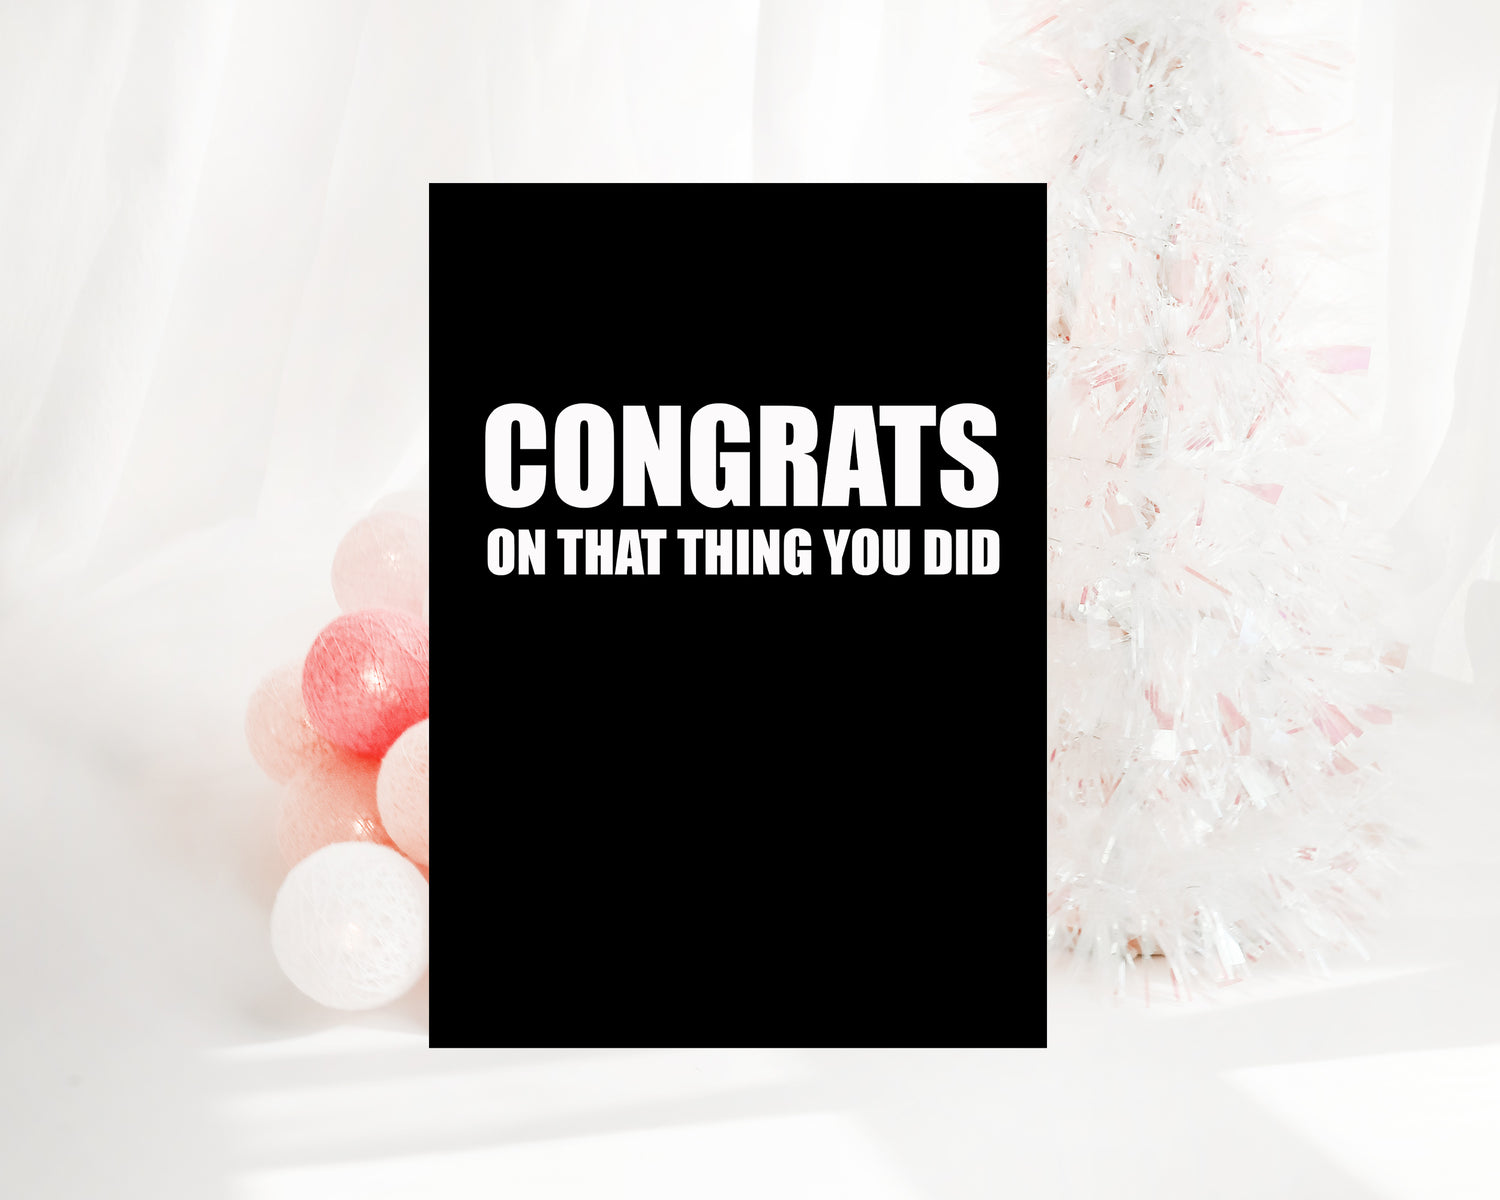 Congrats on that thing you did!  - Creativien